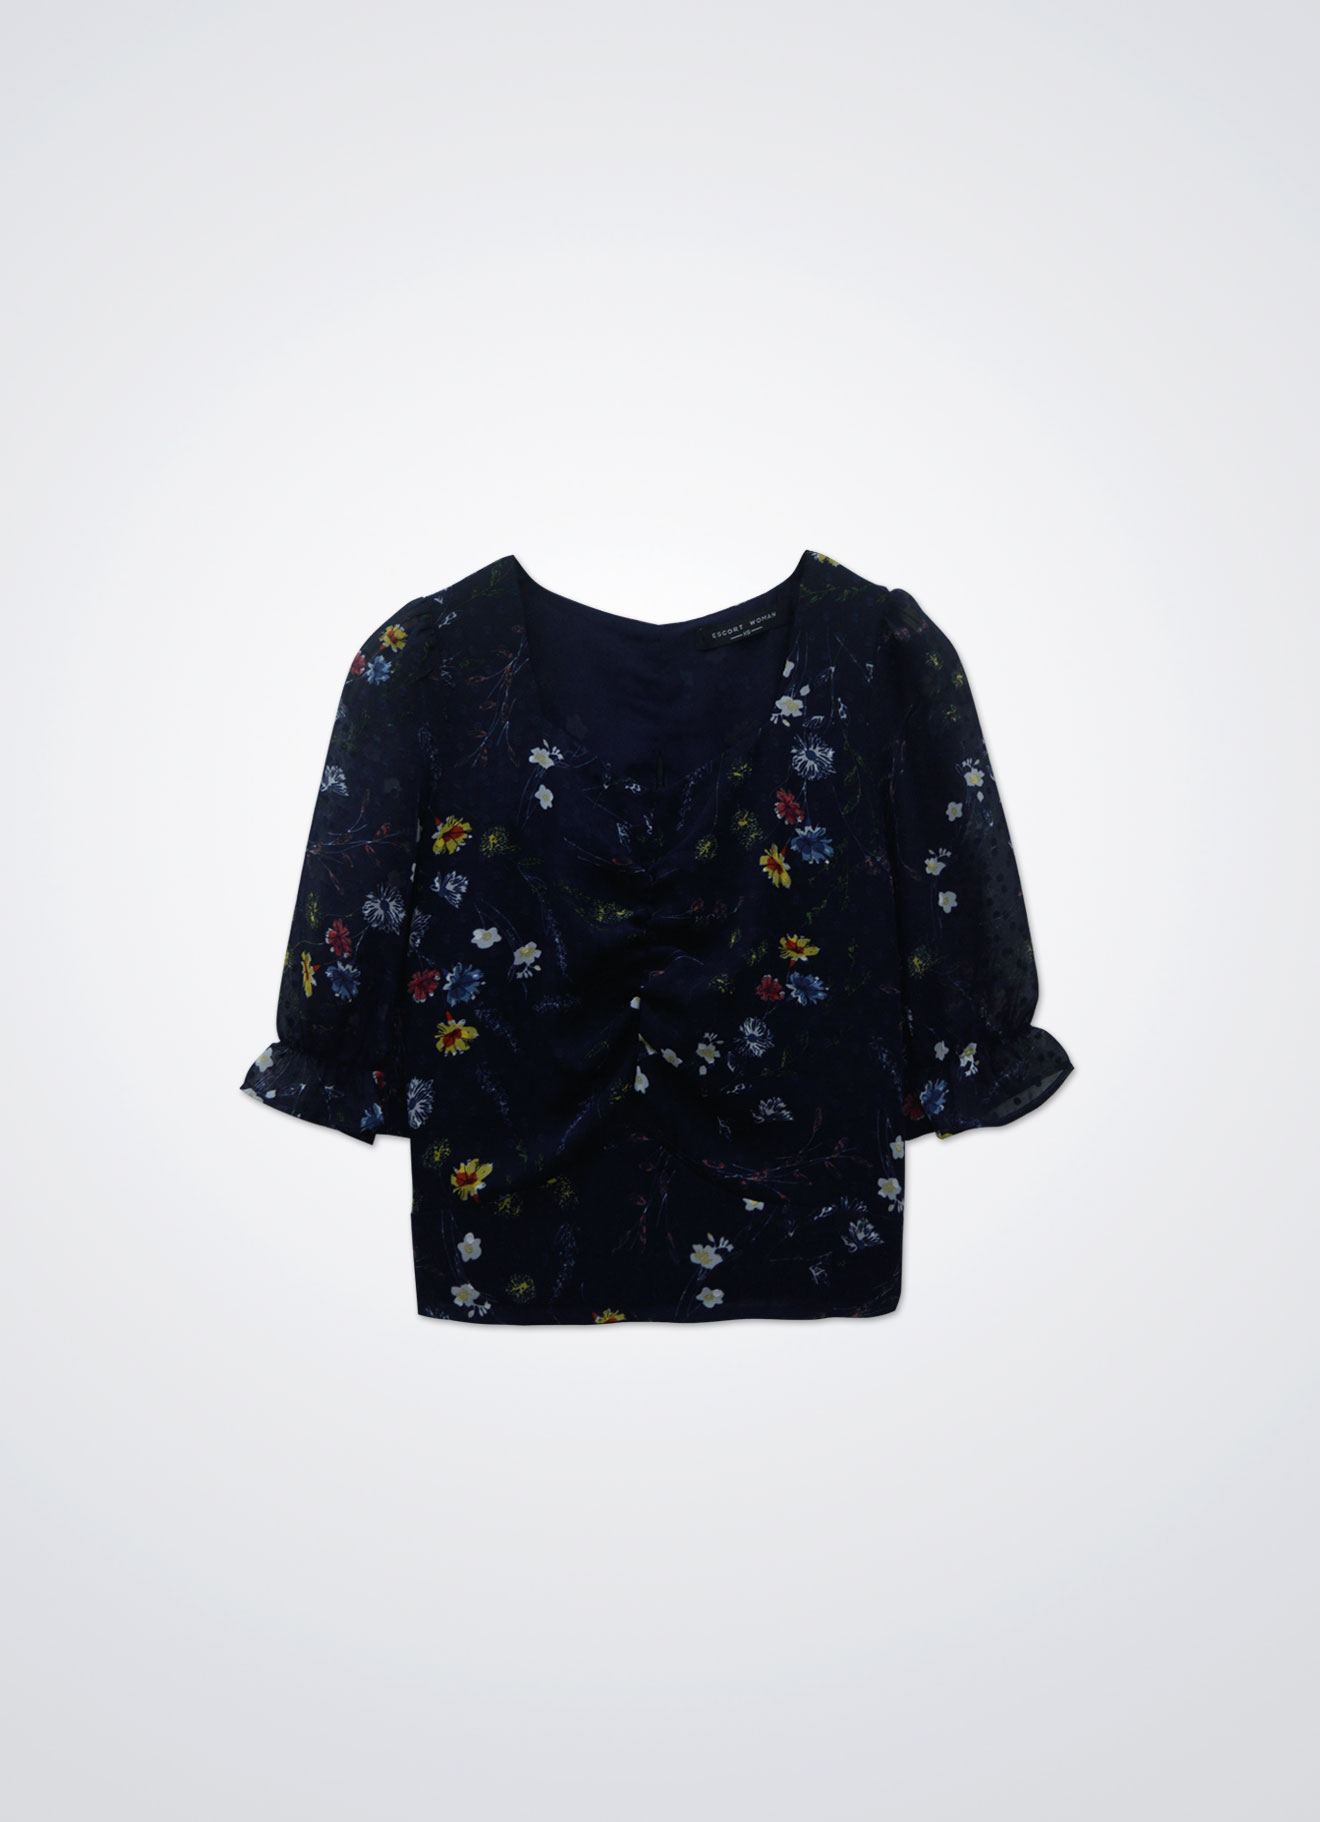 Insignia-Blue by Floral Printed Blouse